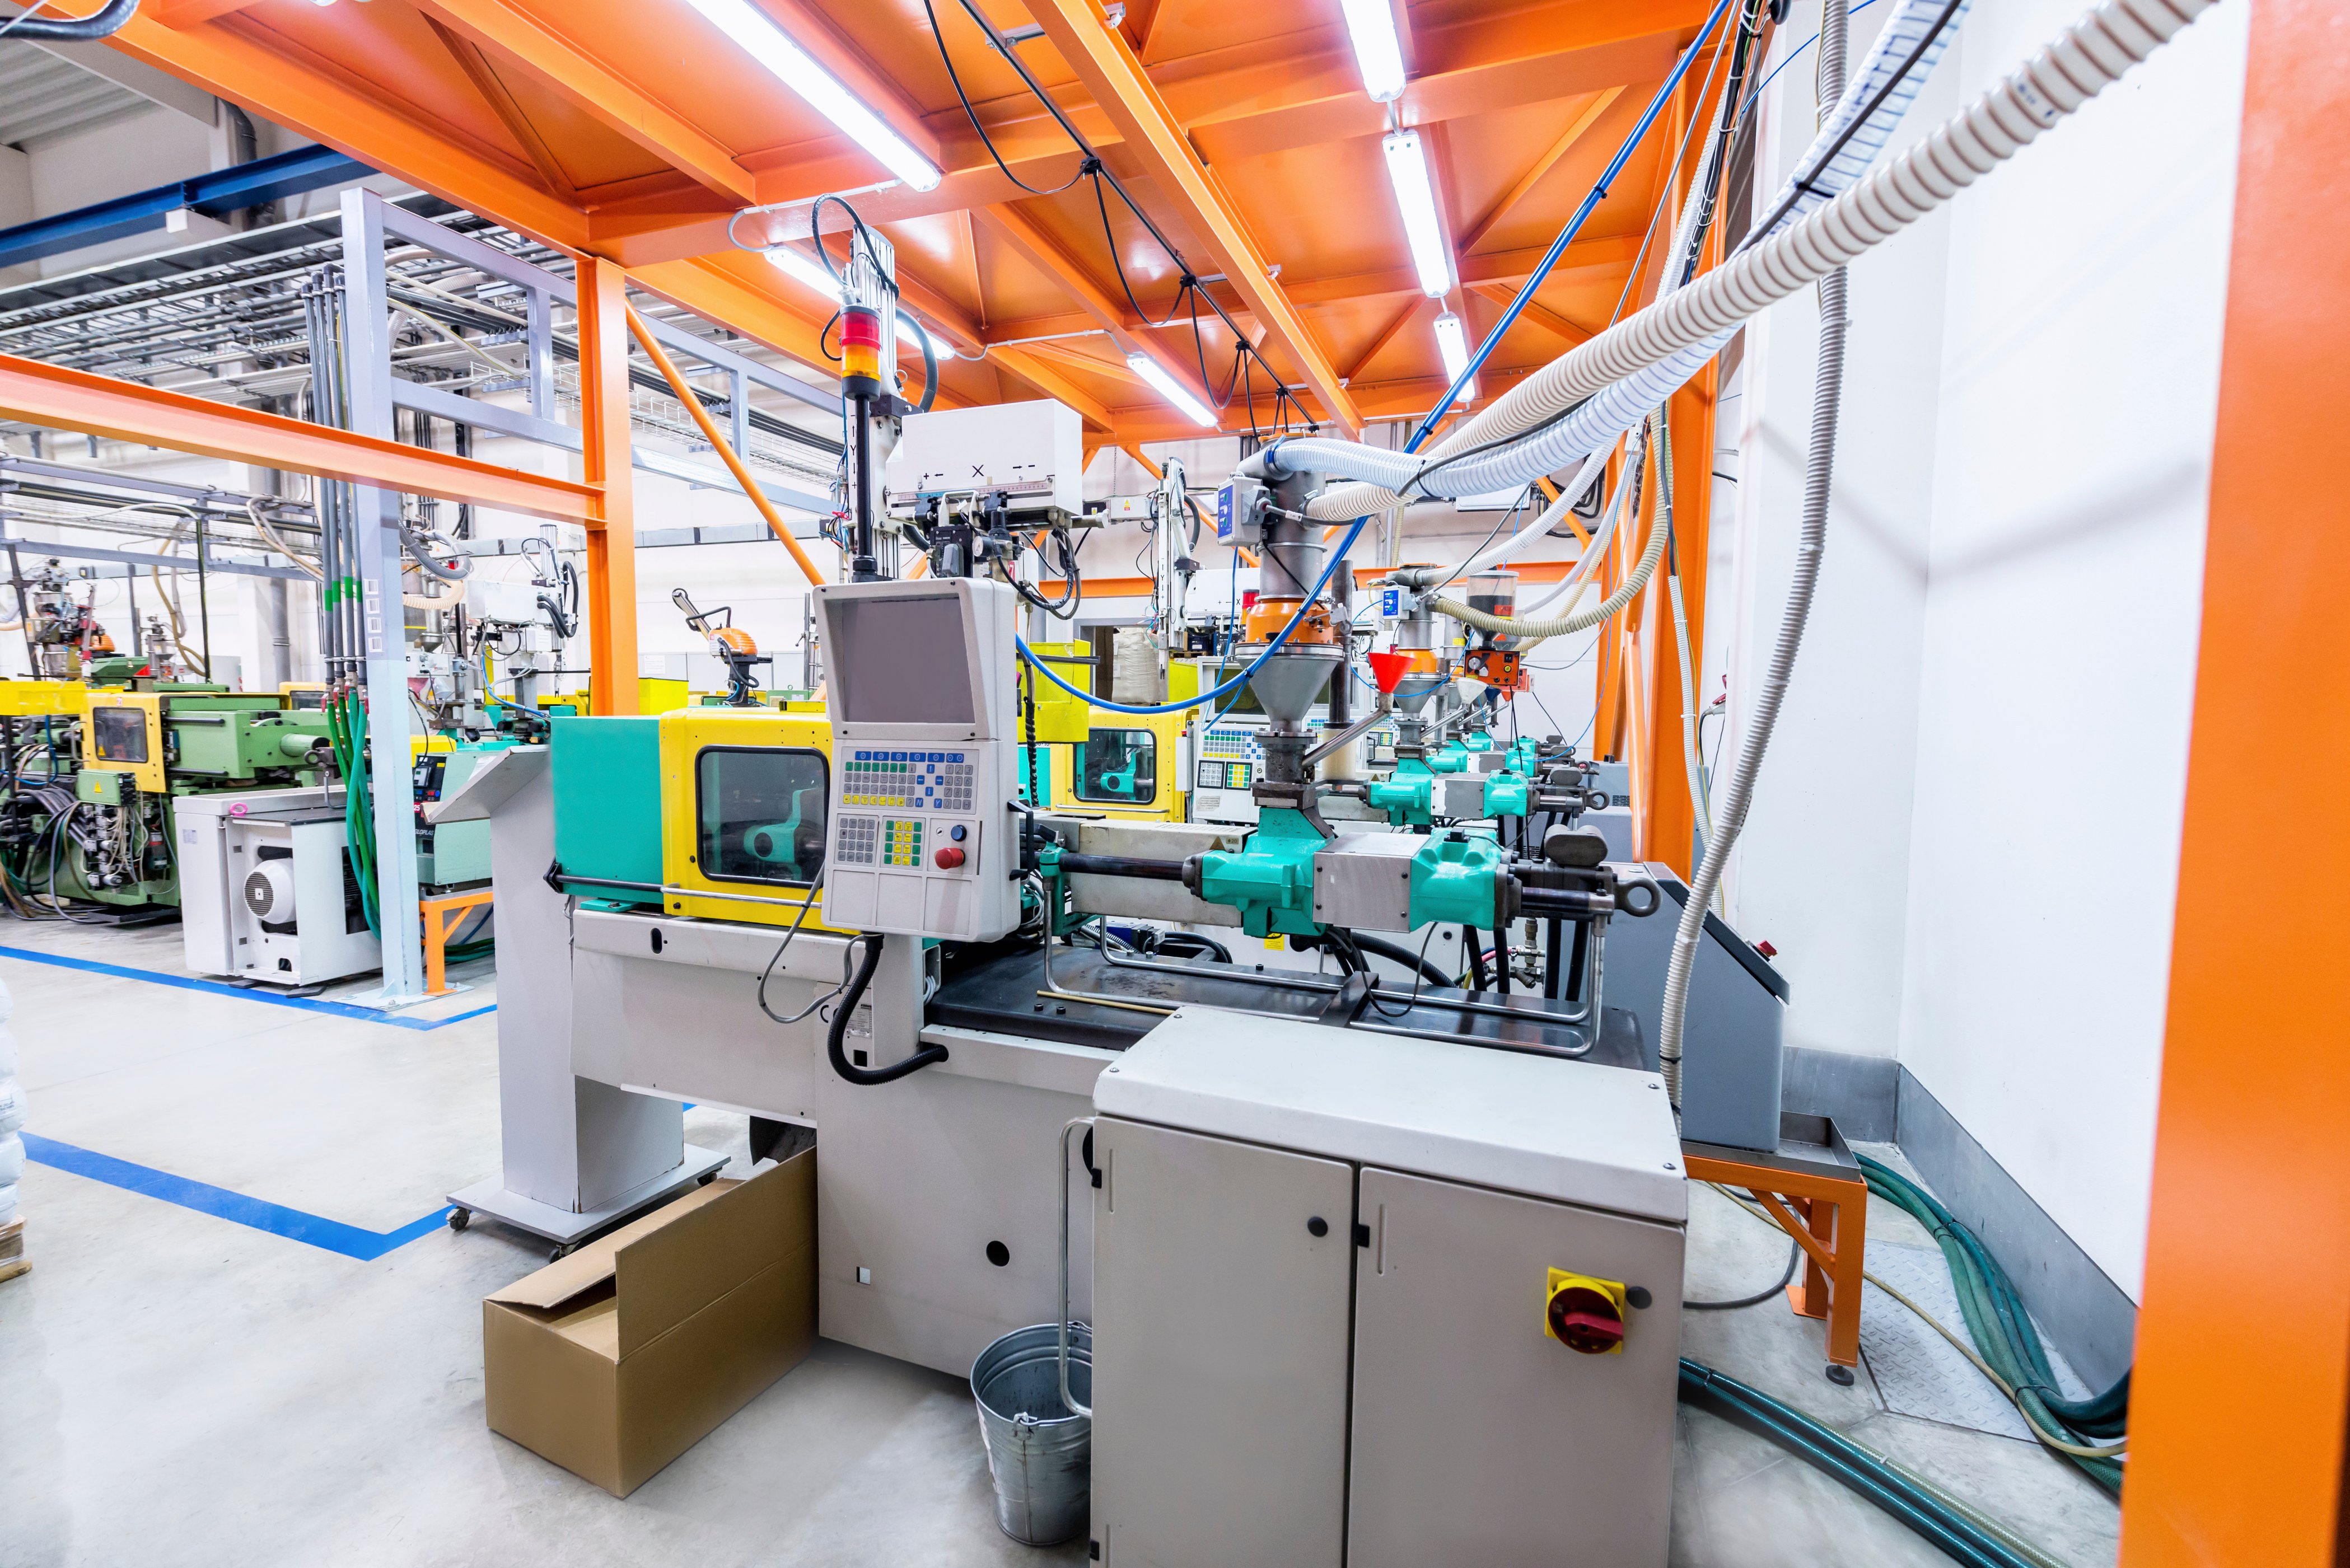 10 Areas to Consider When Selecting a Contract Manufacturer